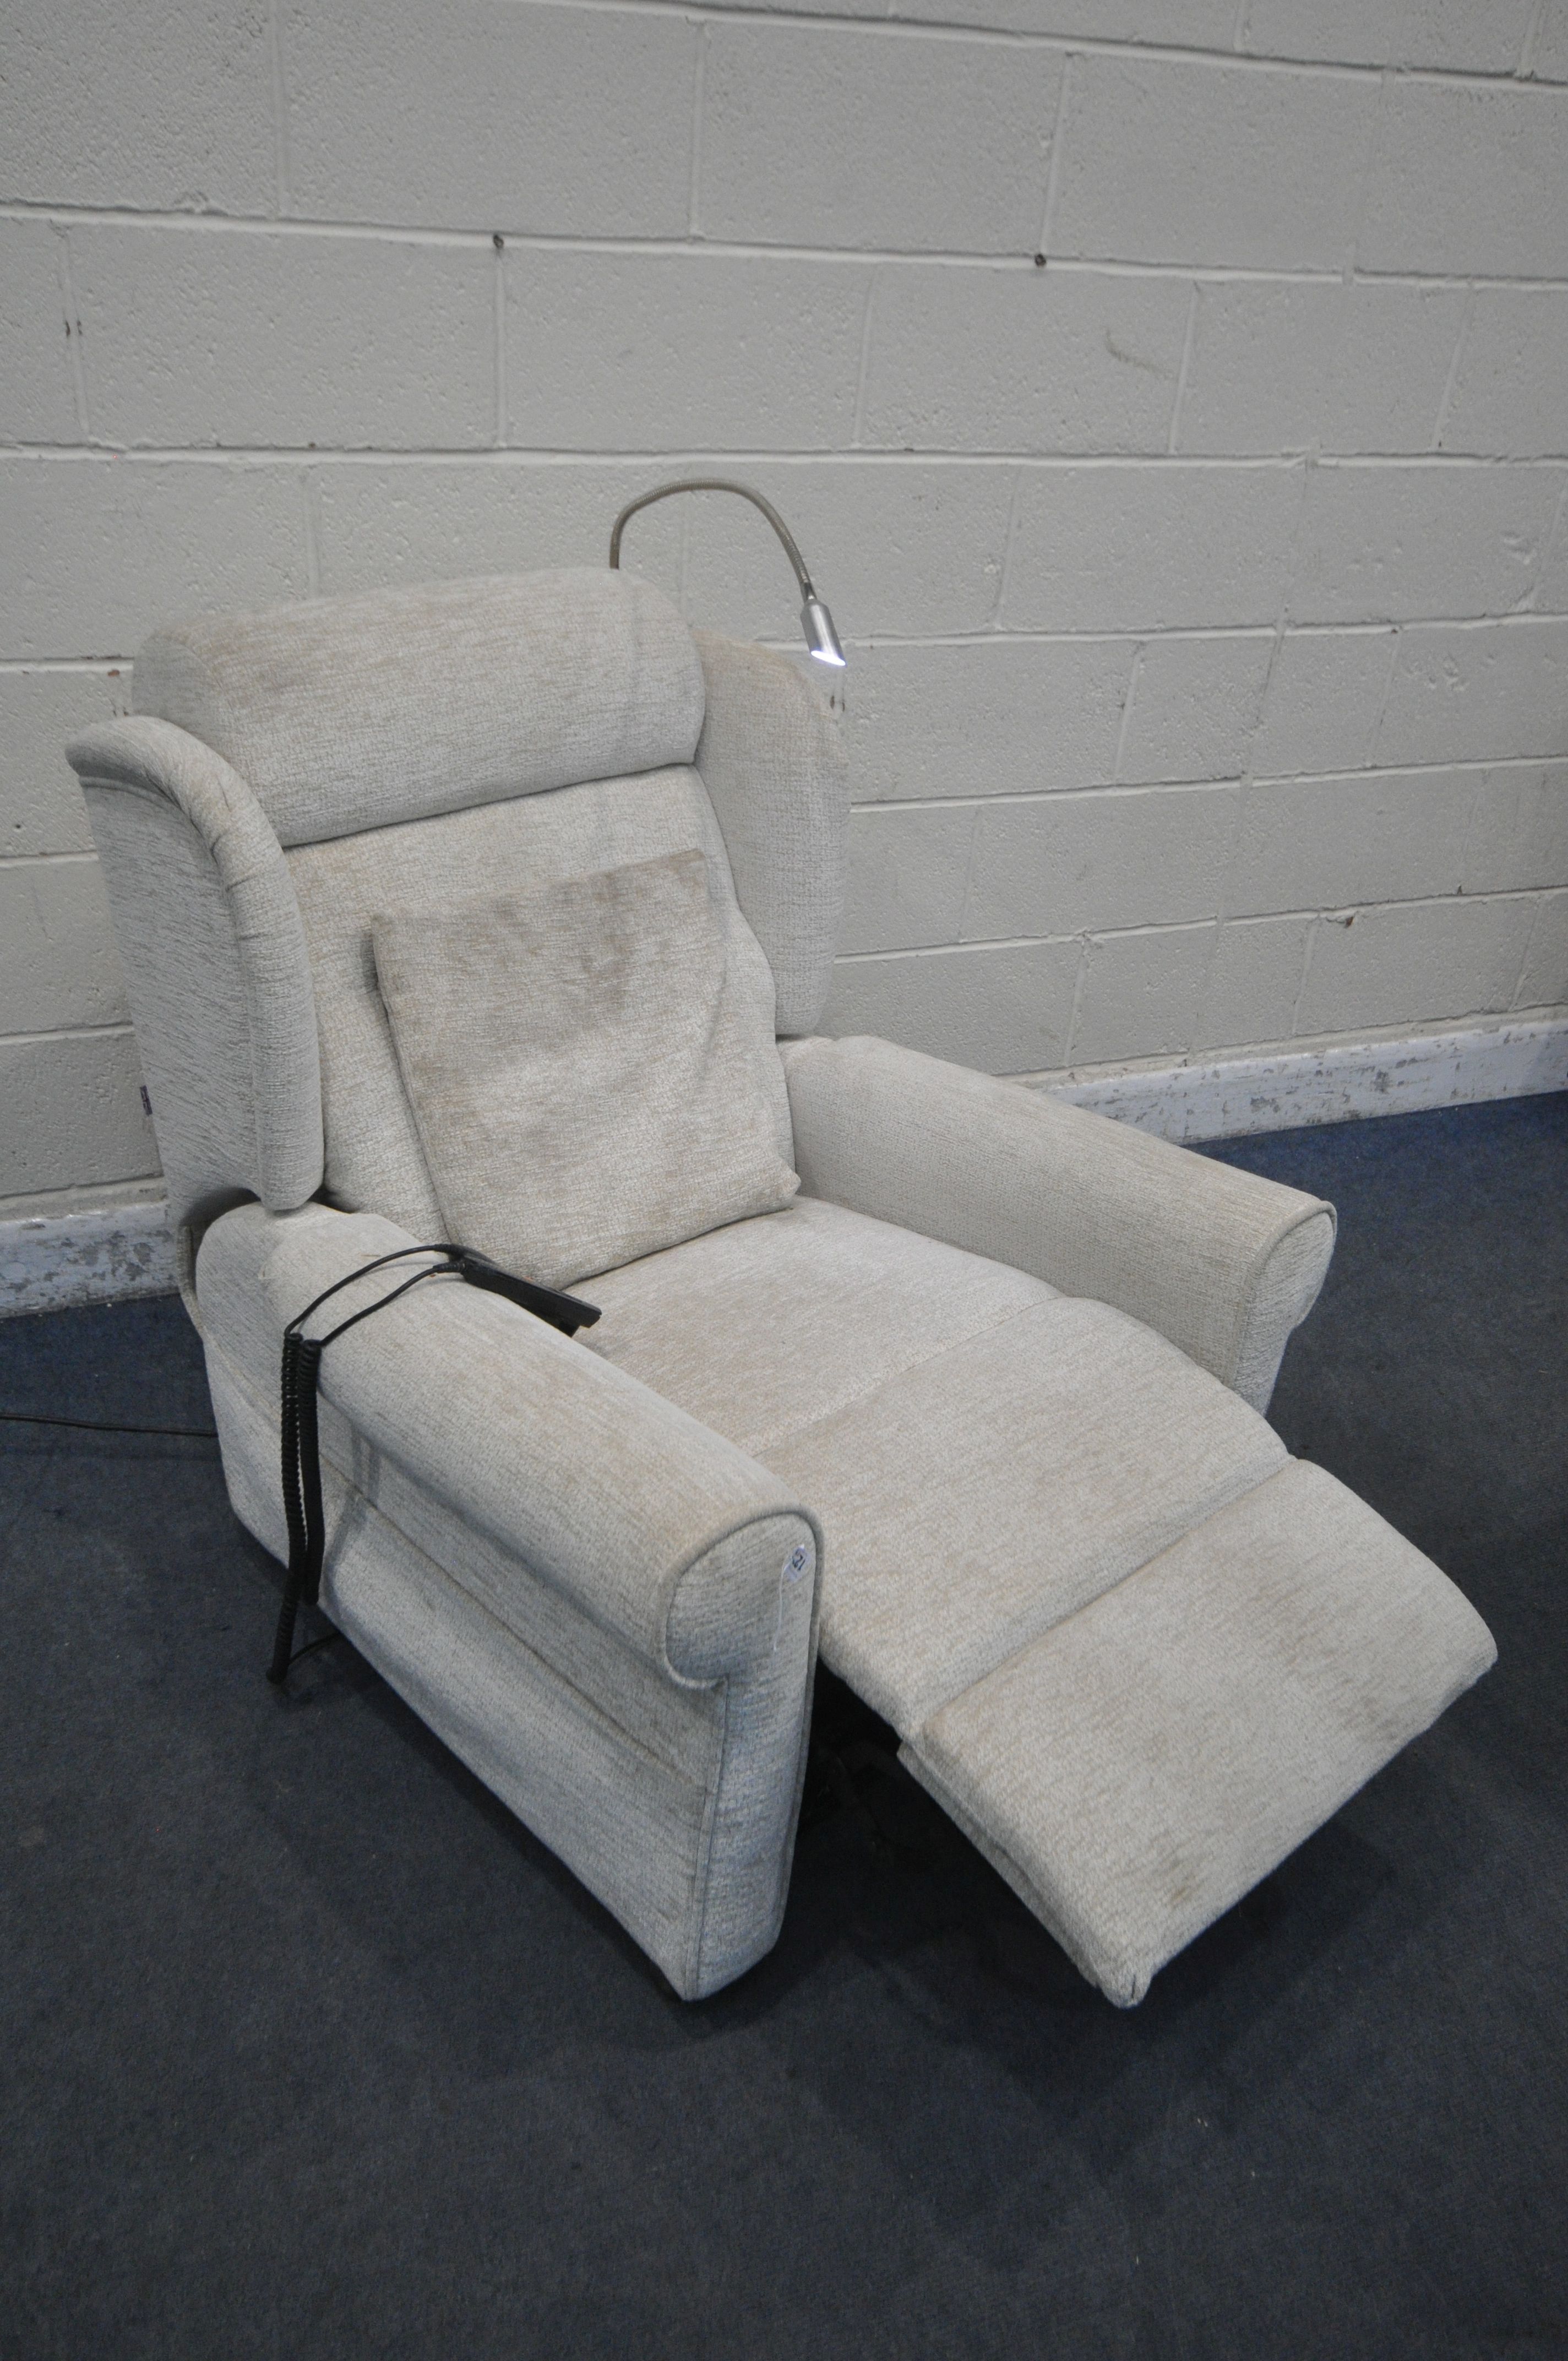 A BEIGE UPHOLSTERED ELECTRIC RISE AND RECLINE ARMCHAIR, with massaging settings (PAT pass and - Image 4 of 4